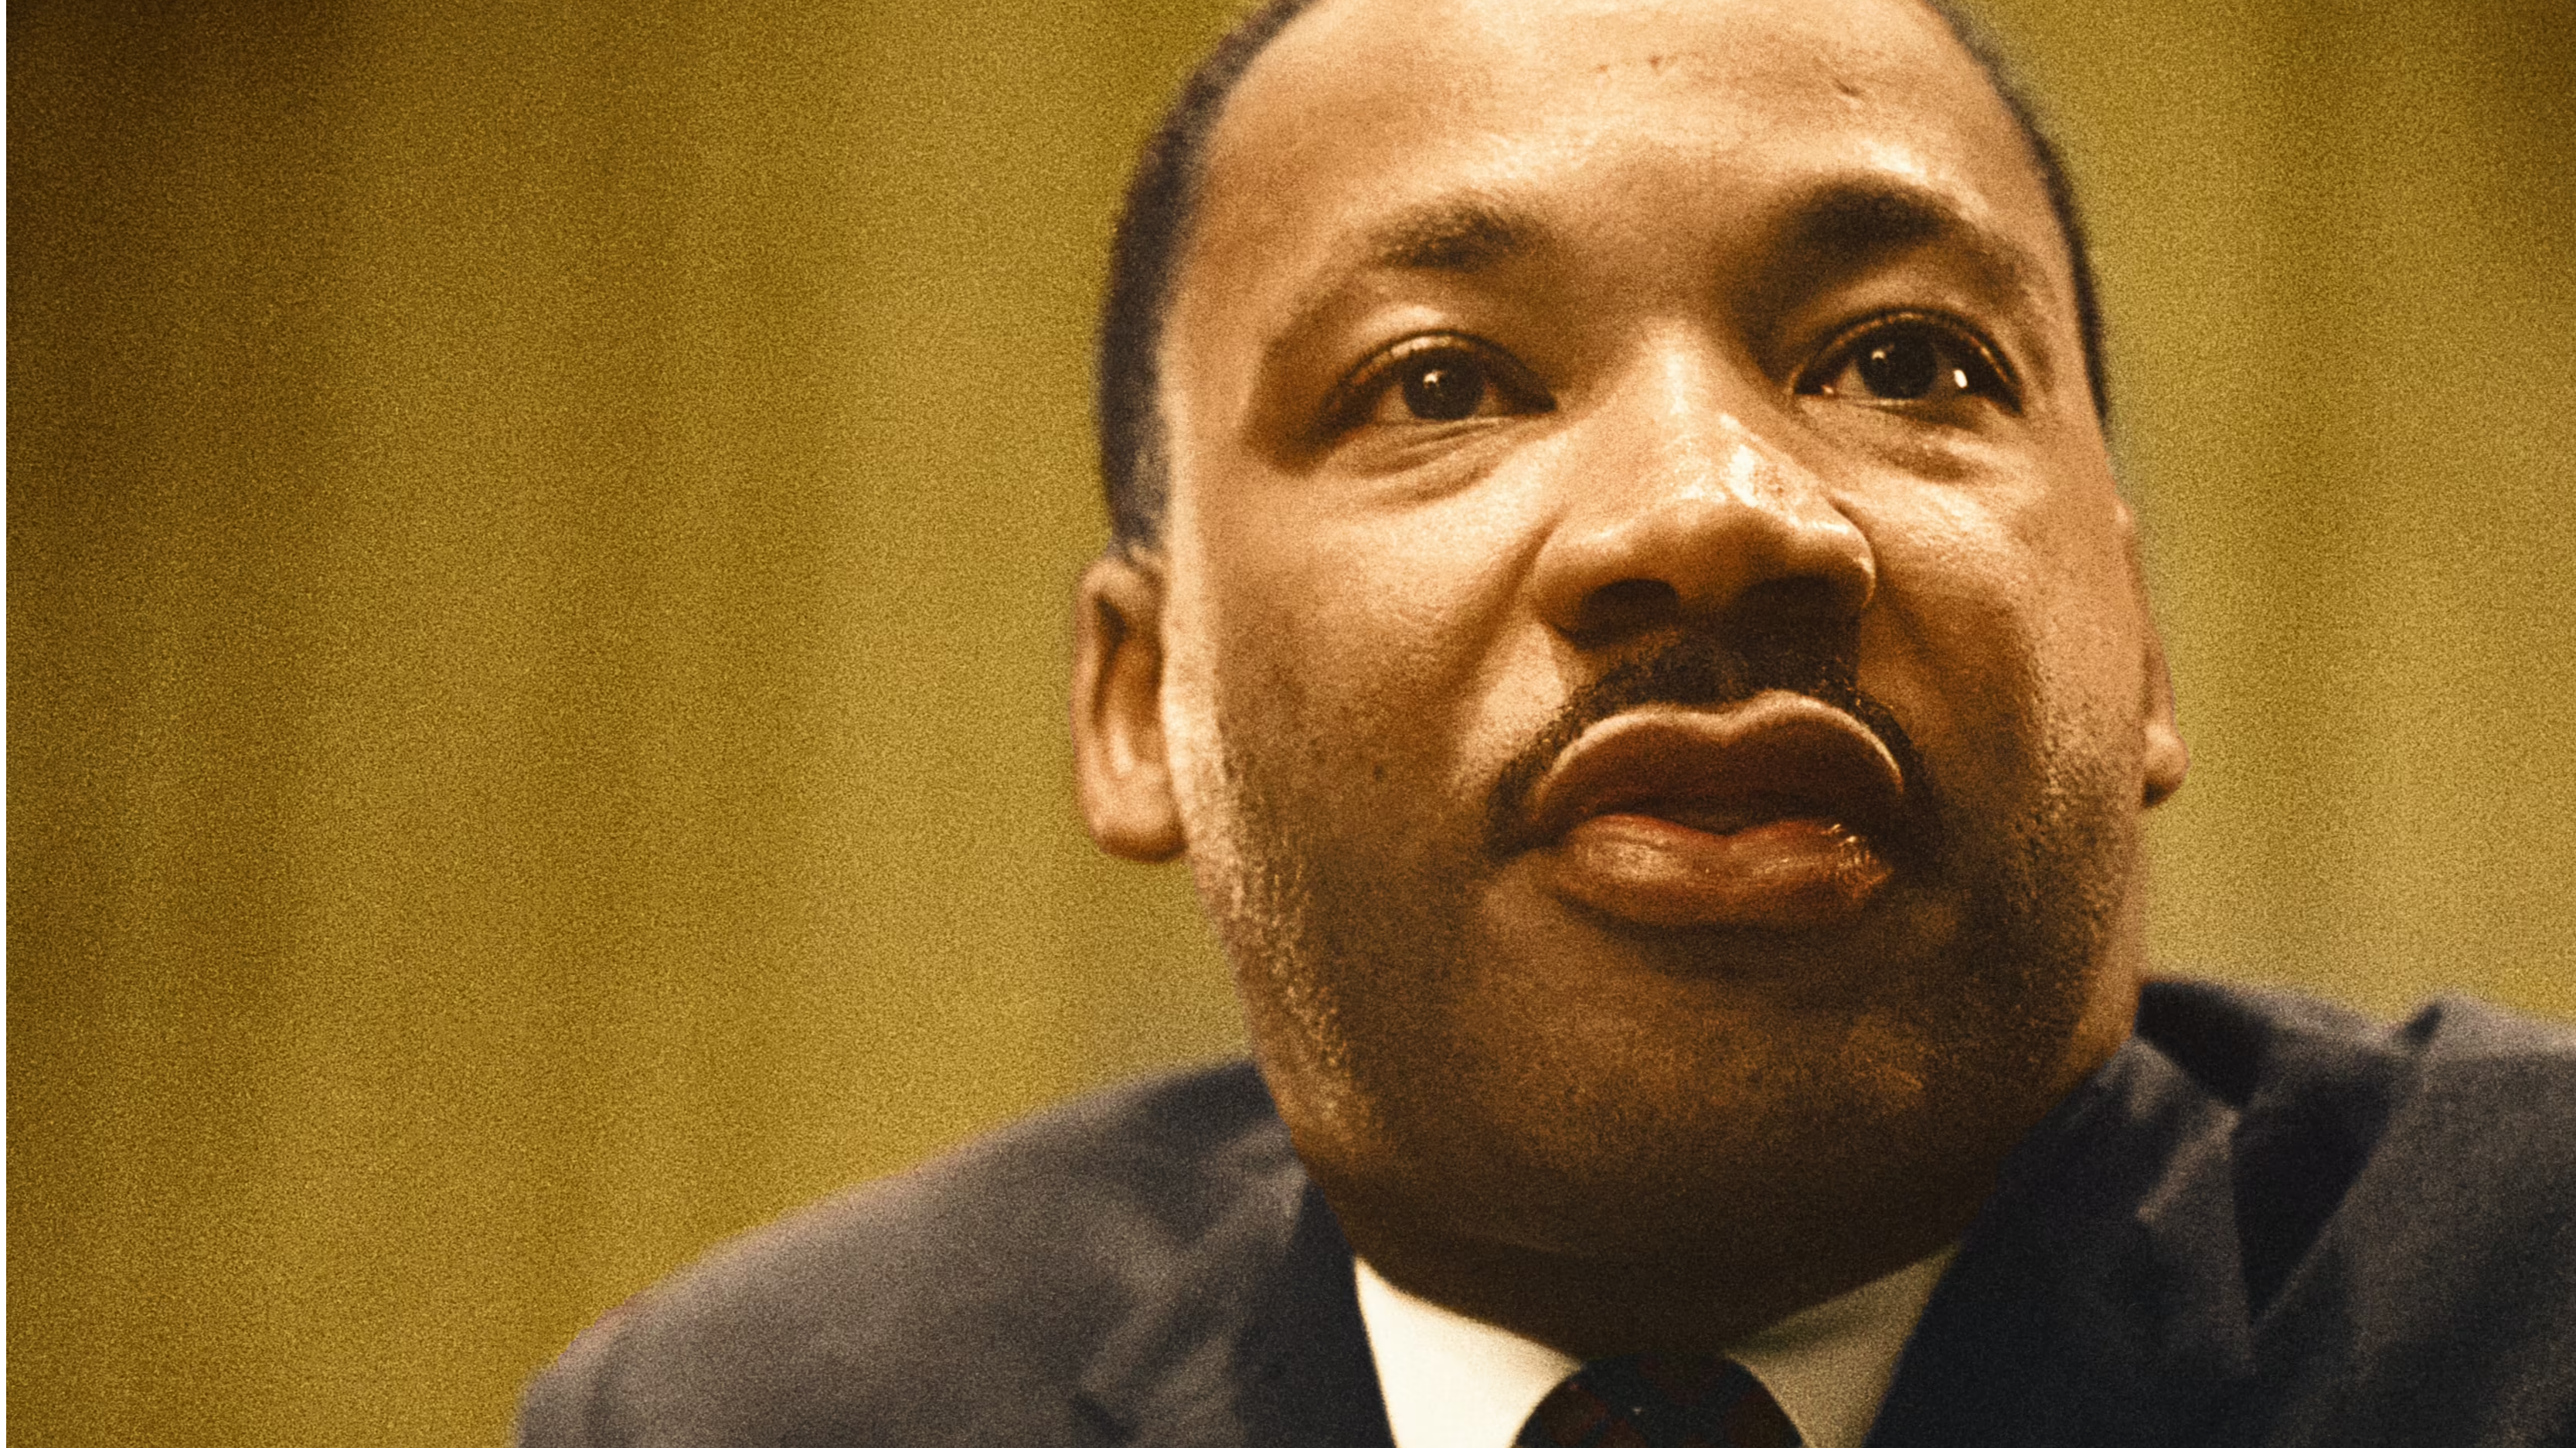 Martin Luther King Jr. Day 2022: What’s open and closed? Banks, mail delivery, stores, restaurants